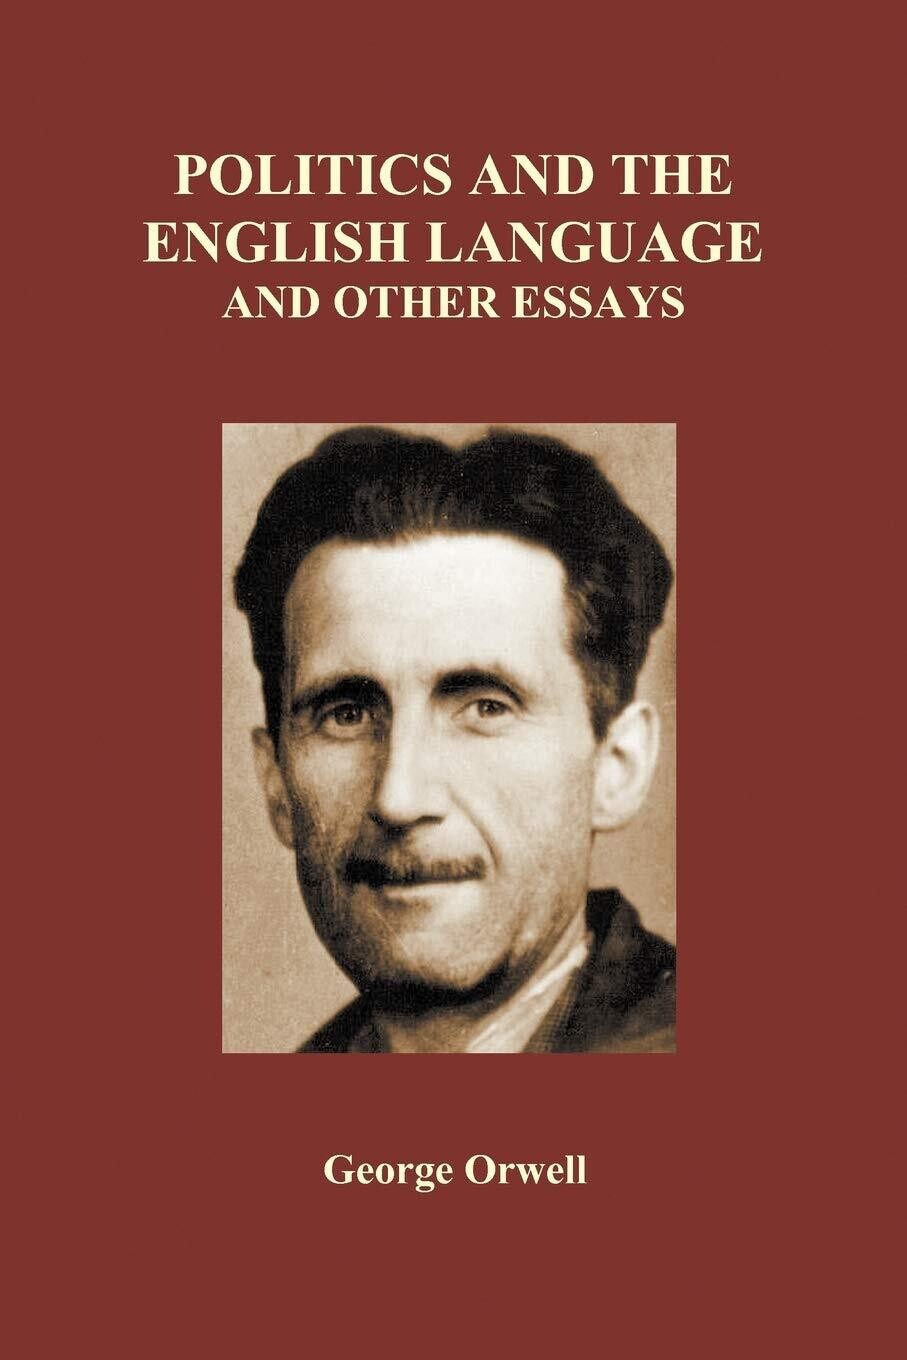 what is george orwell's thesis in politics and the english language